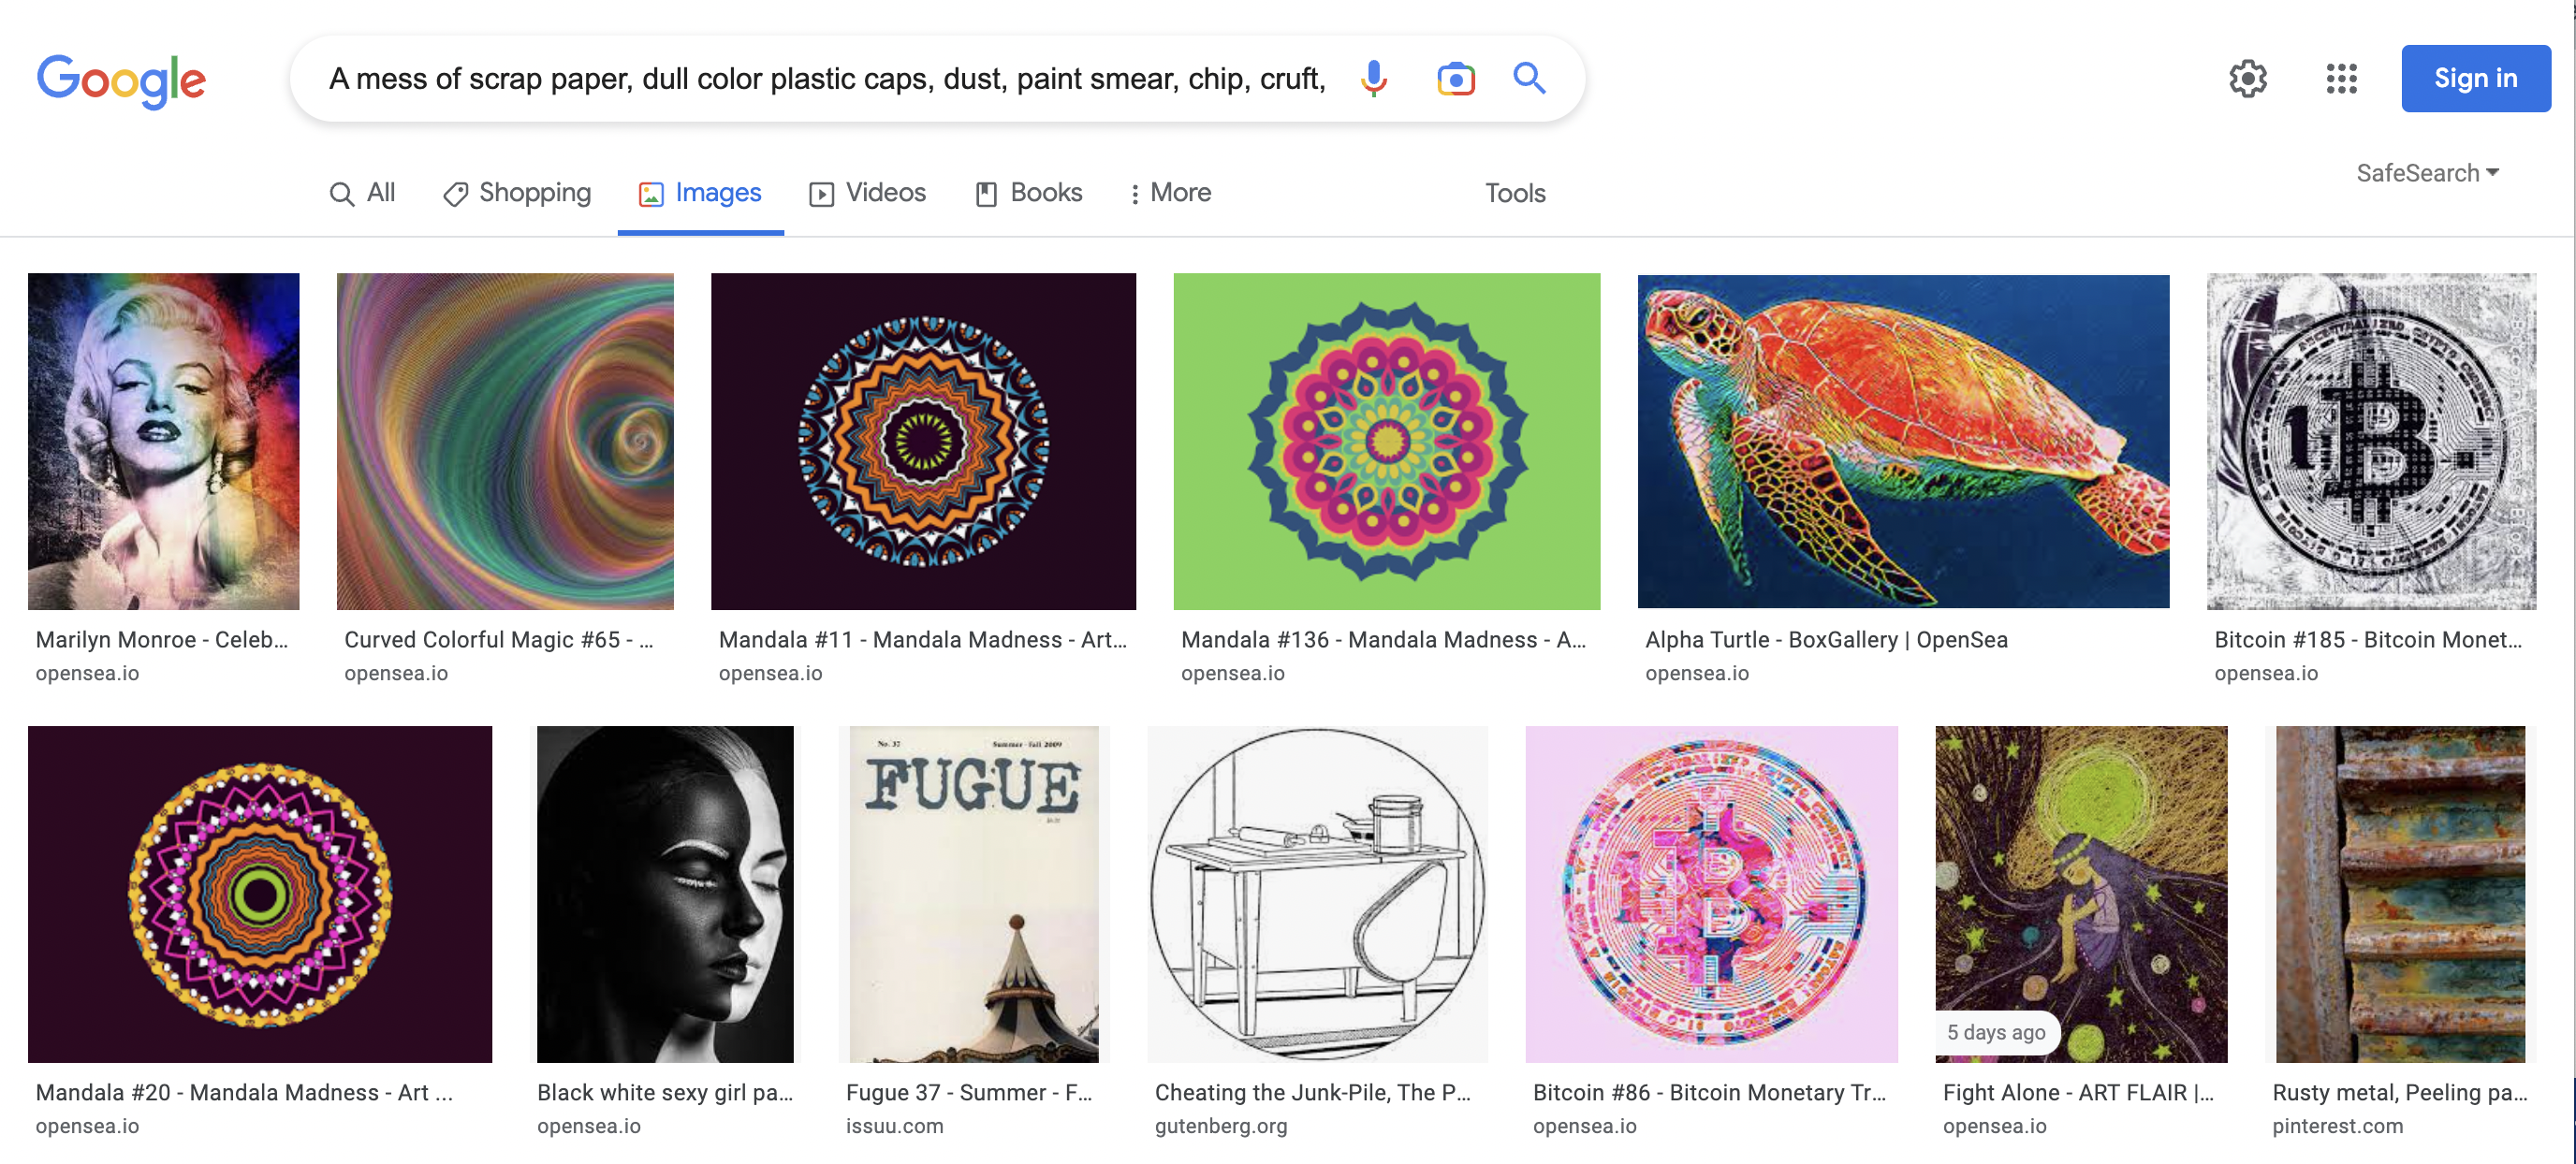 google image search results for Isaac's query.